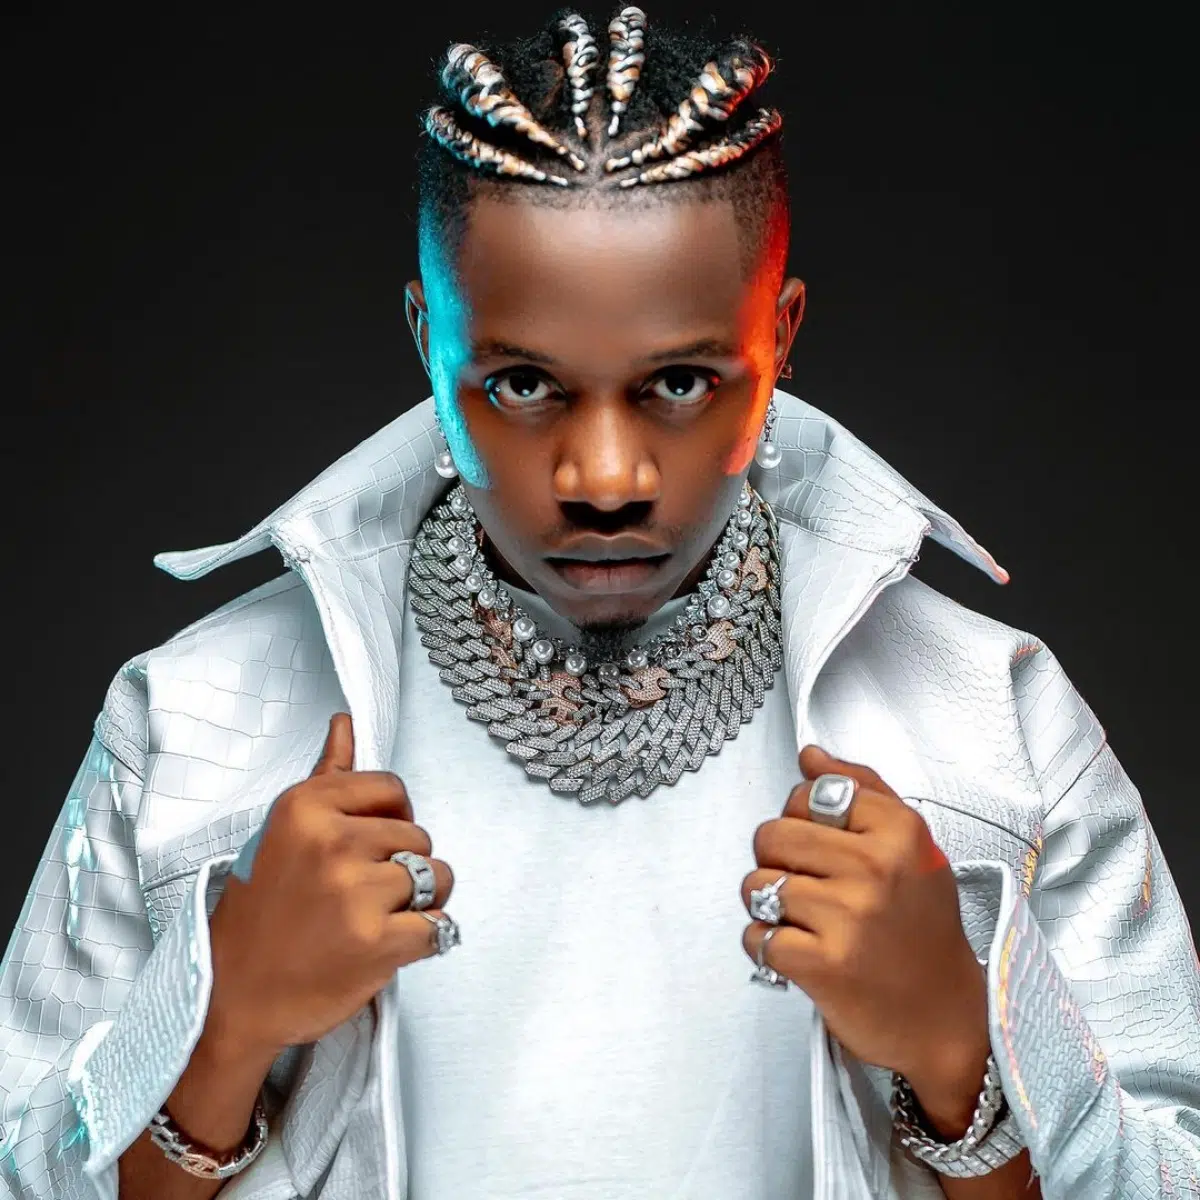 DOWNLOAD: Willy Paul Ft. Rayvanny – “Mmmh” Mp3